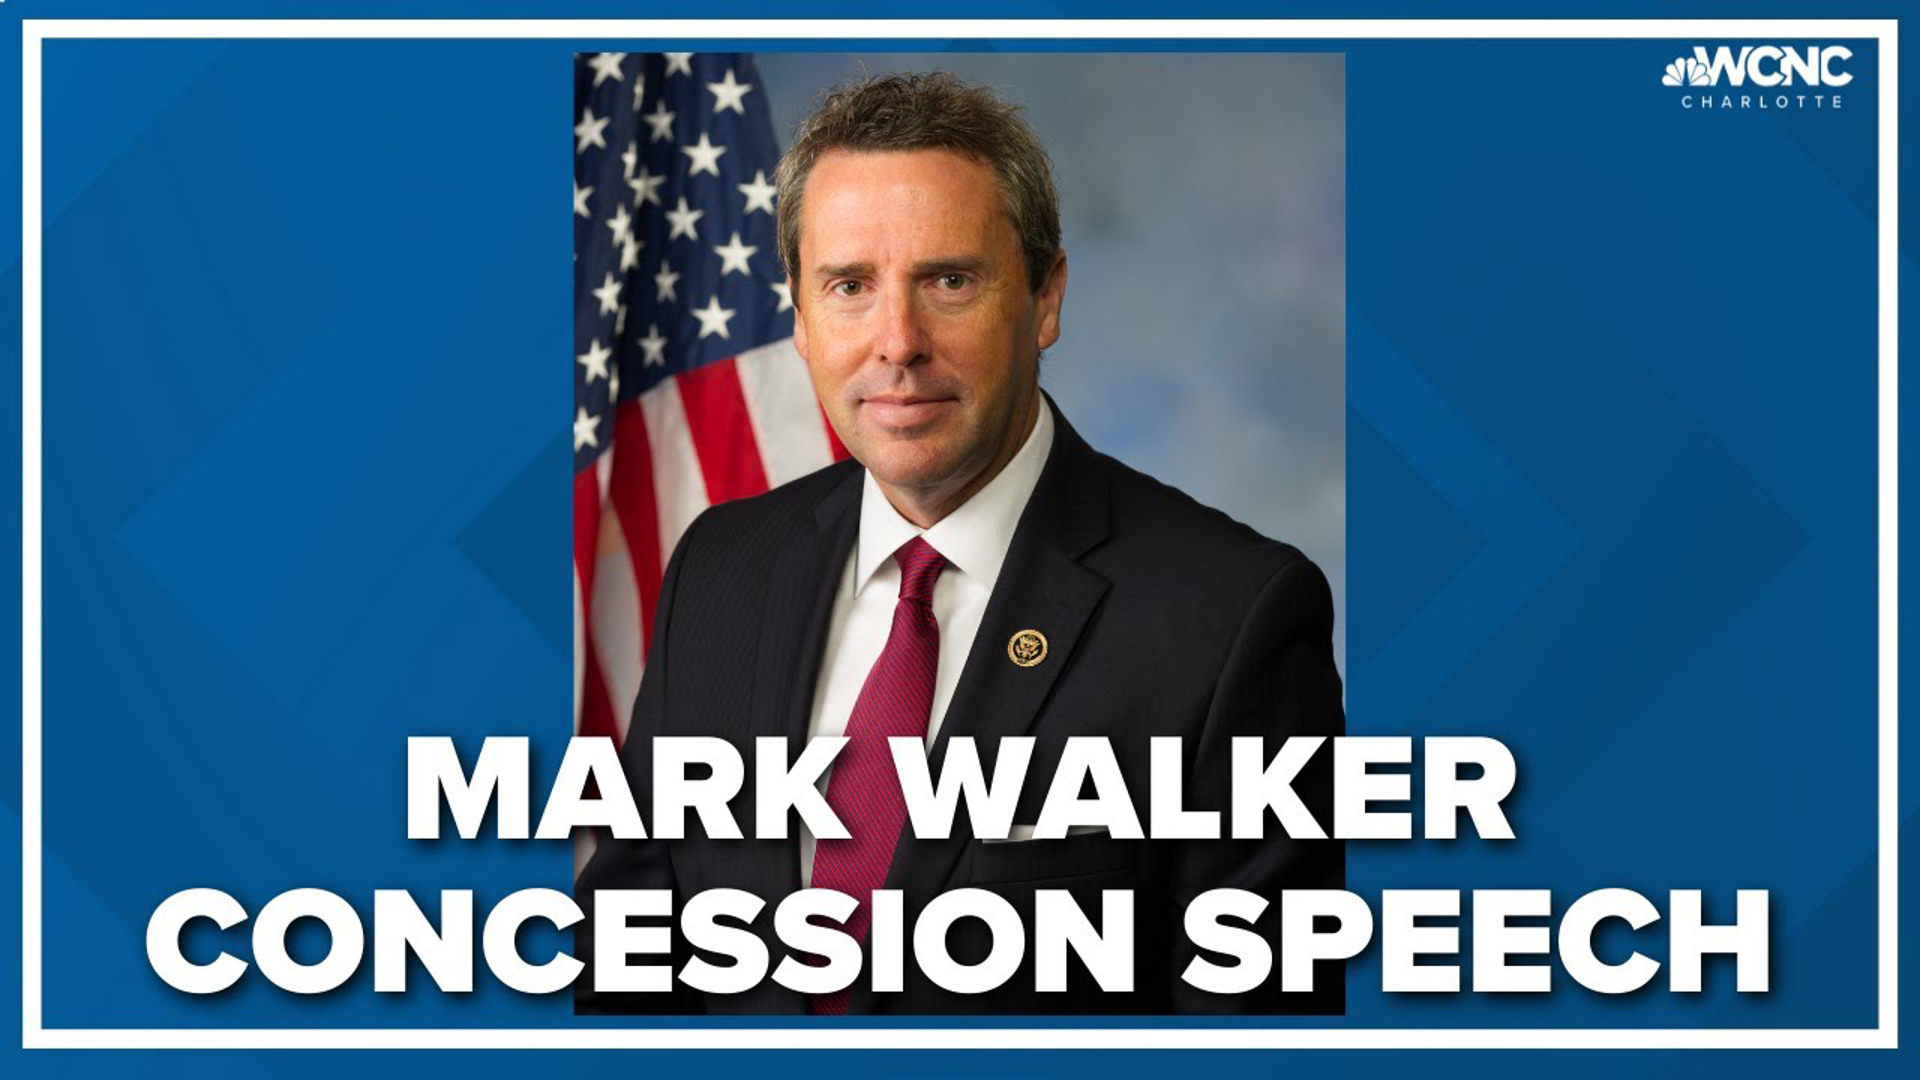 Mark Walker is projected to lose the Republican U.S. Senate in North Carolina to Ted Budd, according to the AP.